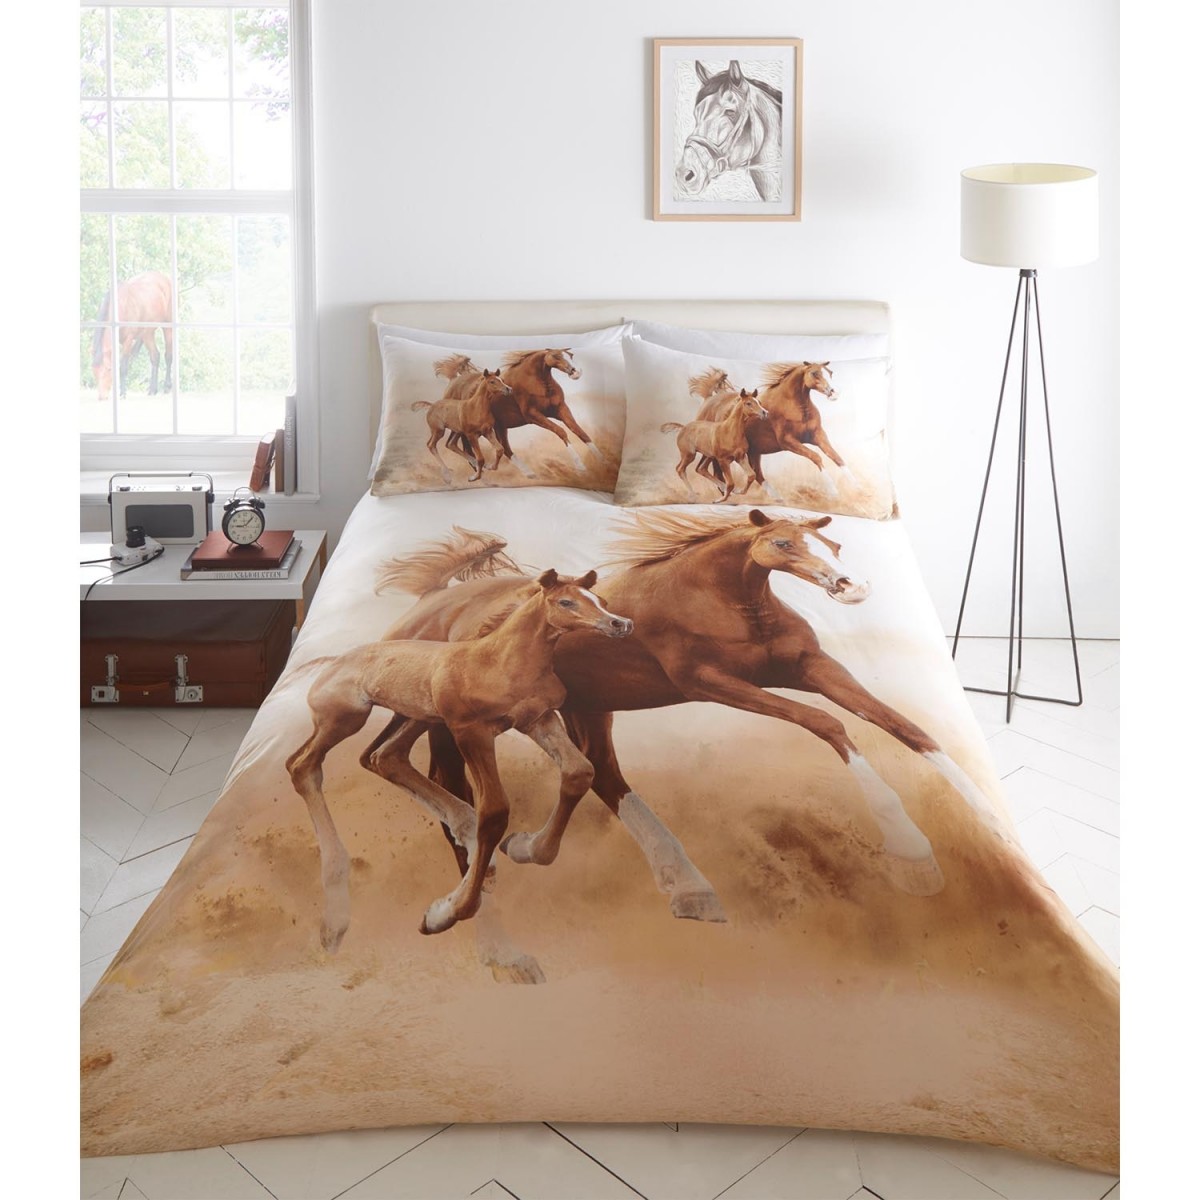 Galloping Horses Foal Stallion Pony Photo Quality Duvet Cover